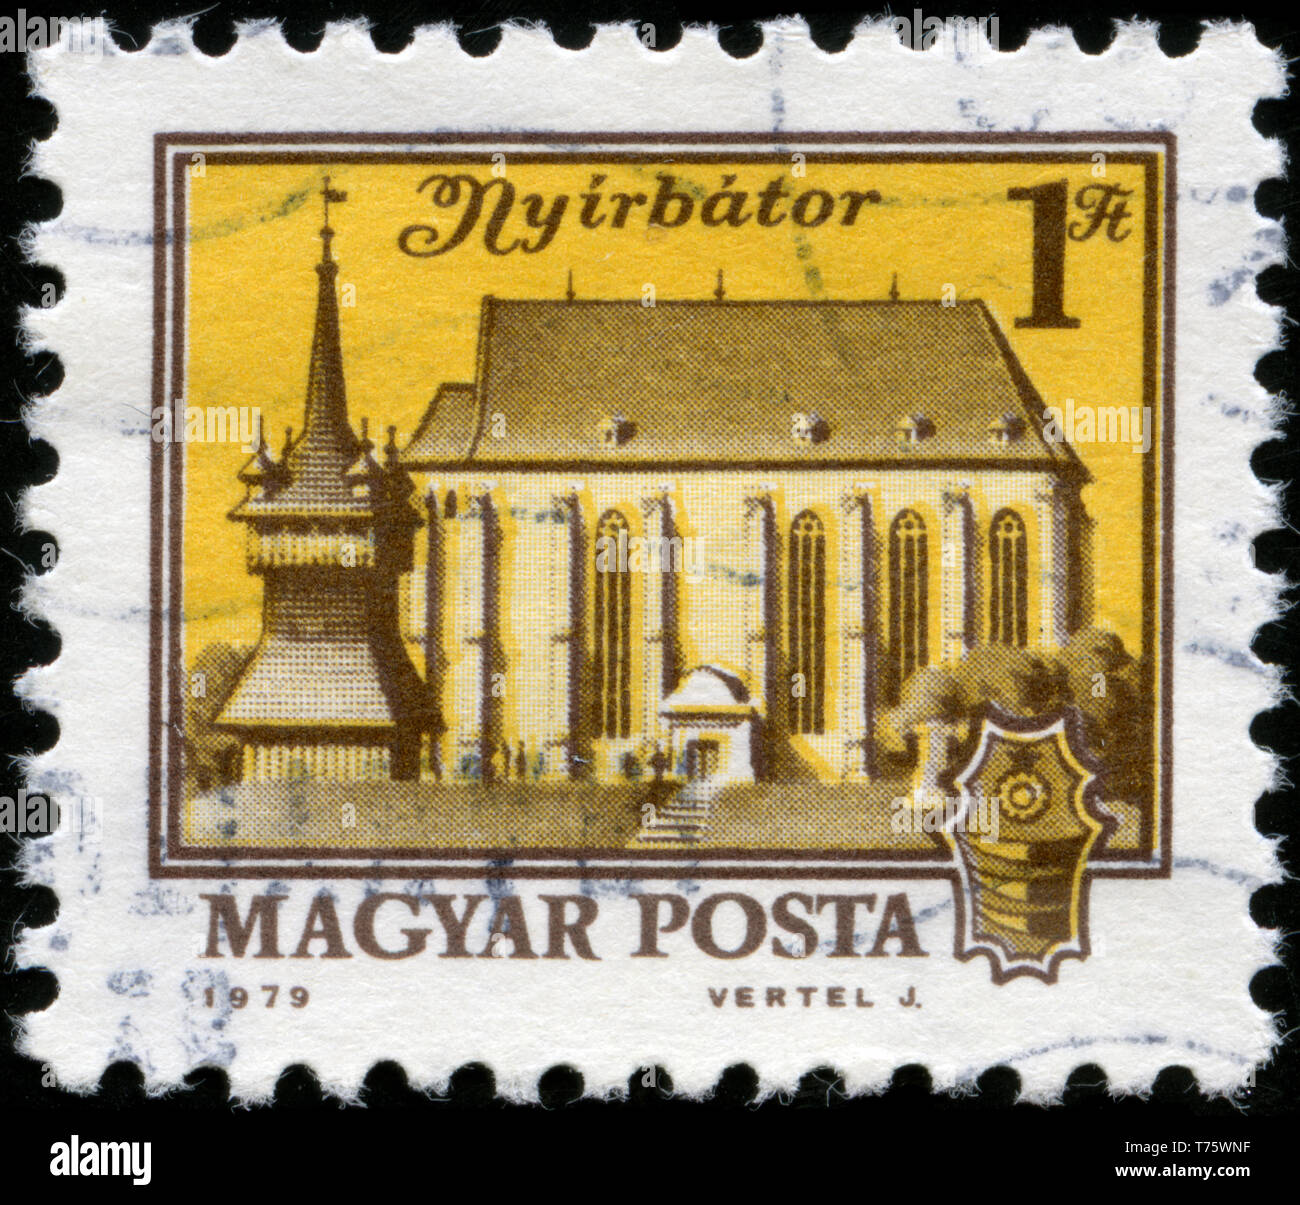 Postage stamp from Hungary in the Cityscapes series issued in 1979 Stock Photo